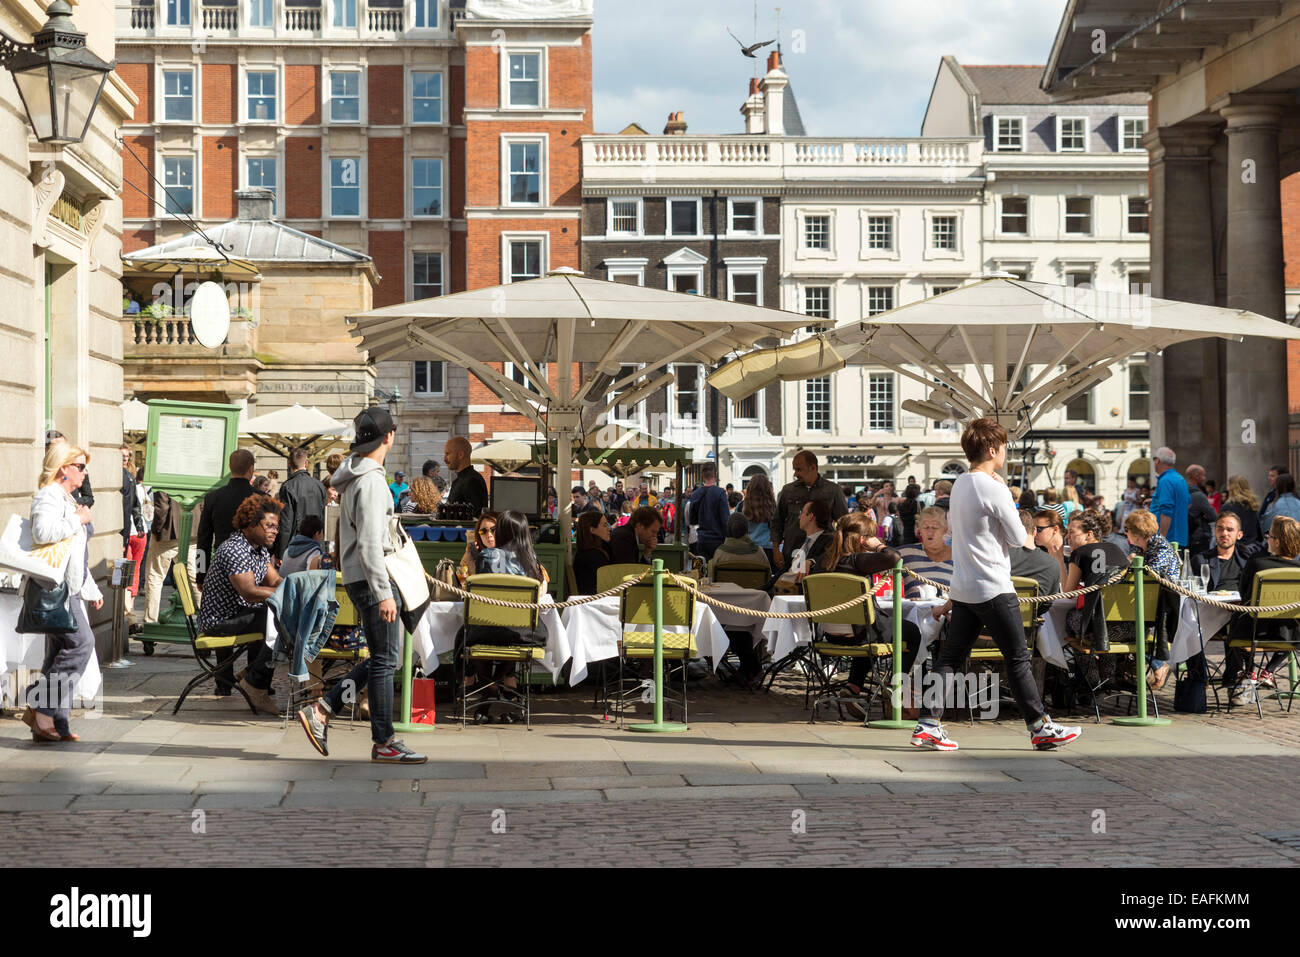 LONDON, UNITED KINGDOM - JUNE 5,  2014: People having lunch at Covent Garden, London. The outer side offers small restaurants fo Stock Photo